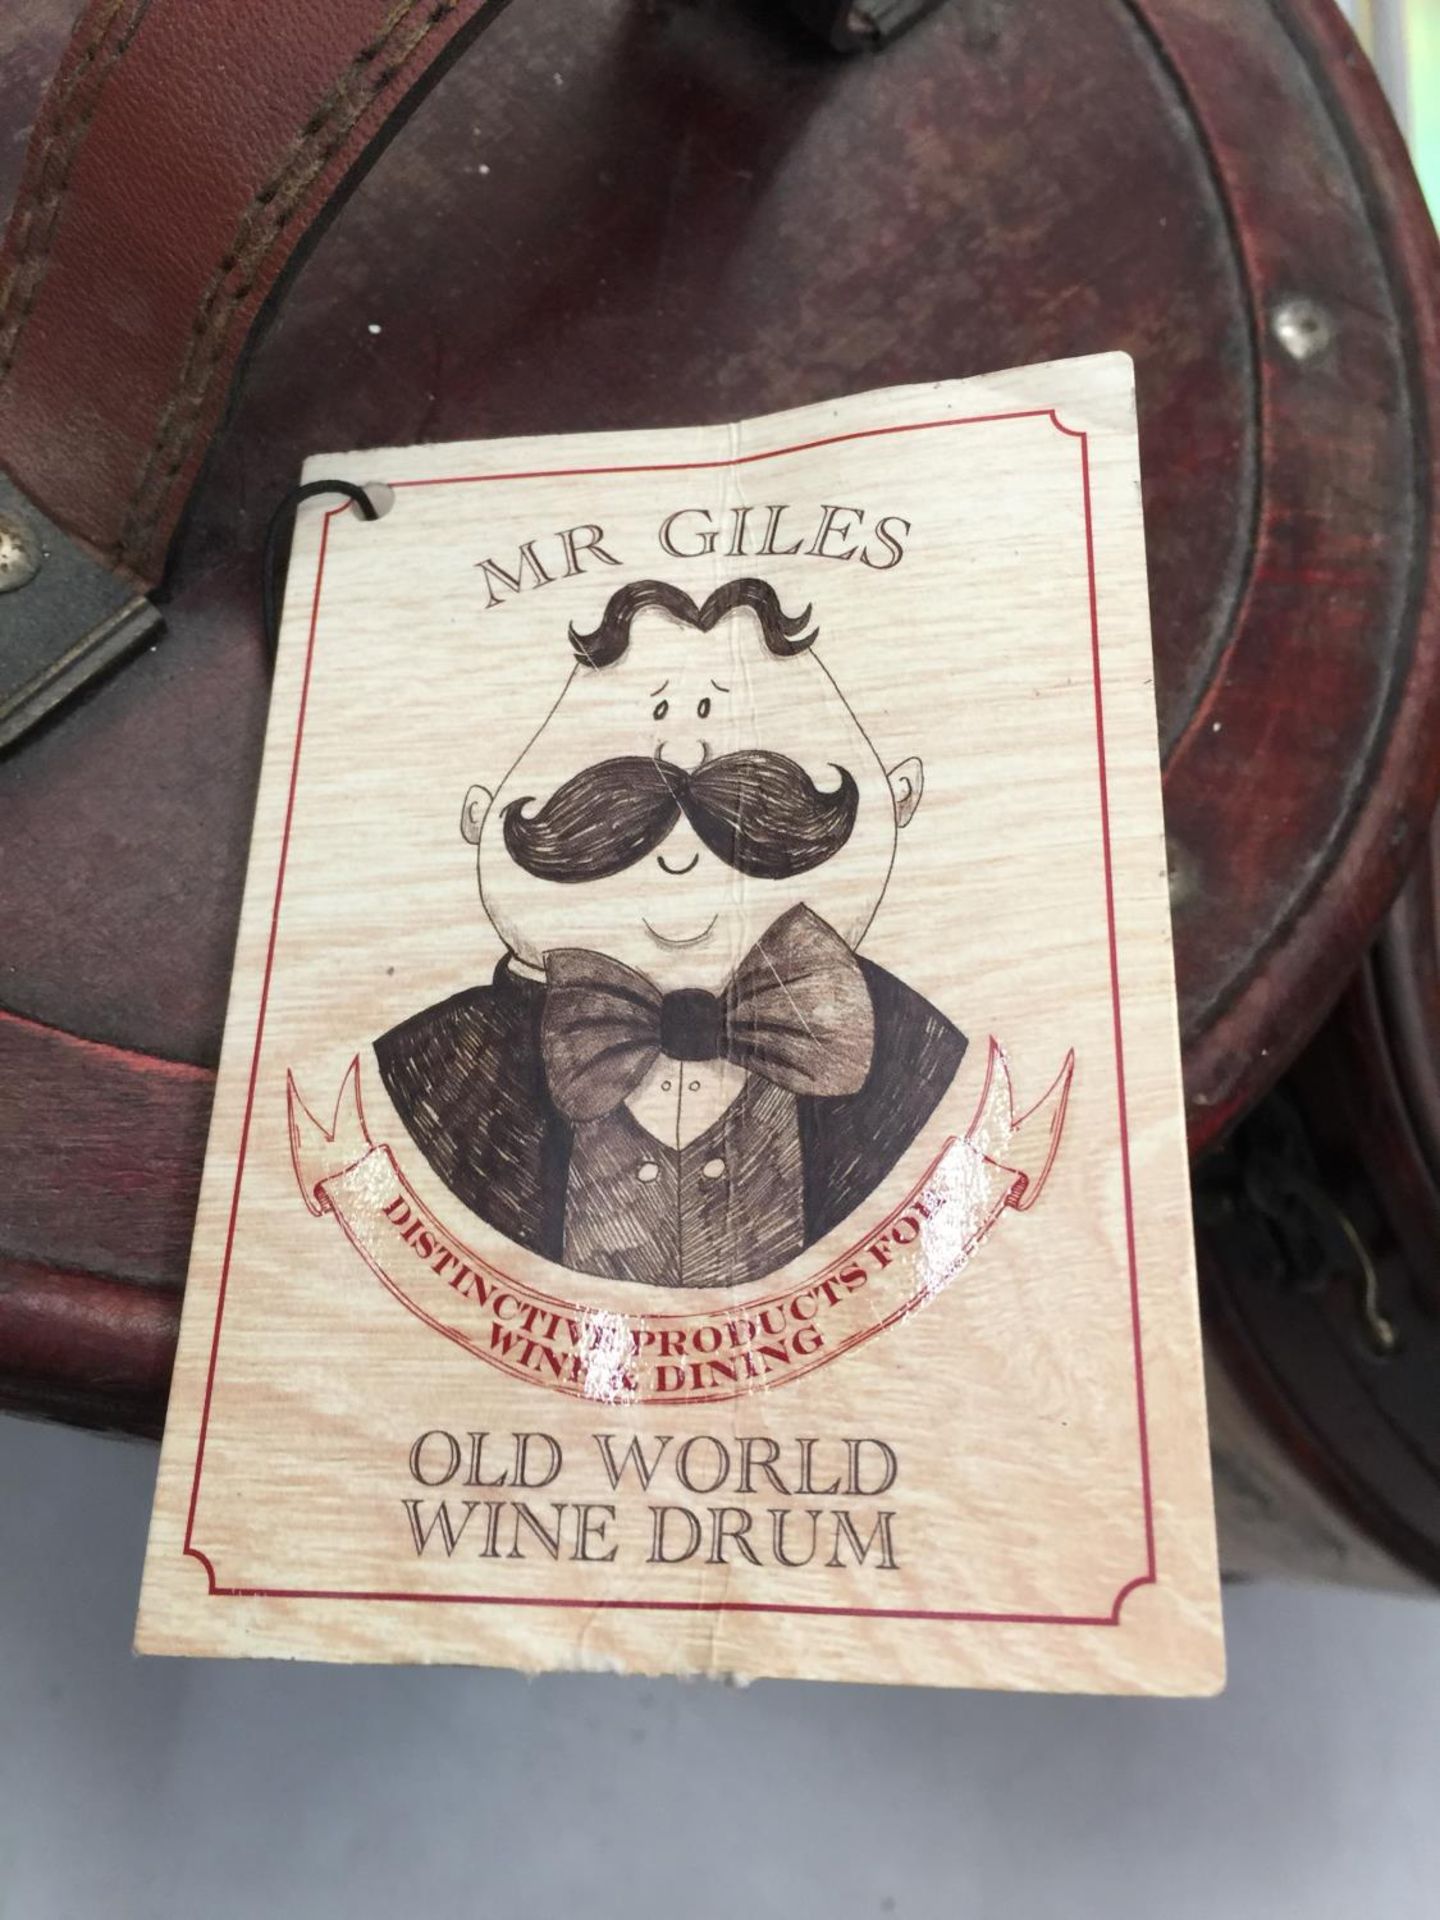 TWO 'OLD WORLD' WINE DRUMS - Image 3 of 4